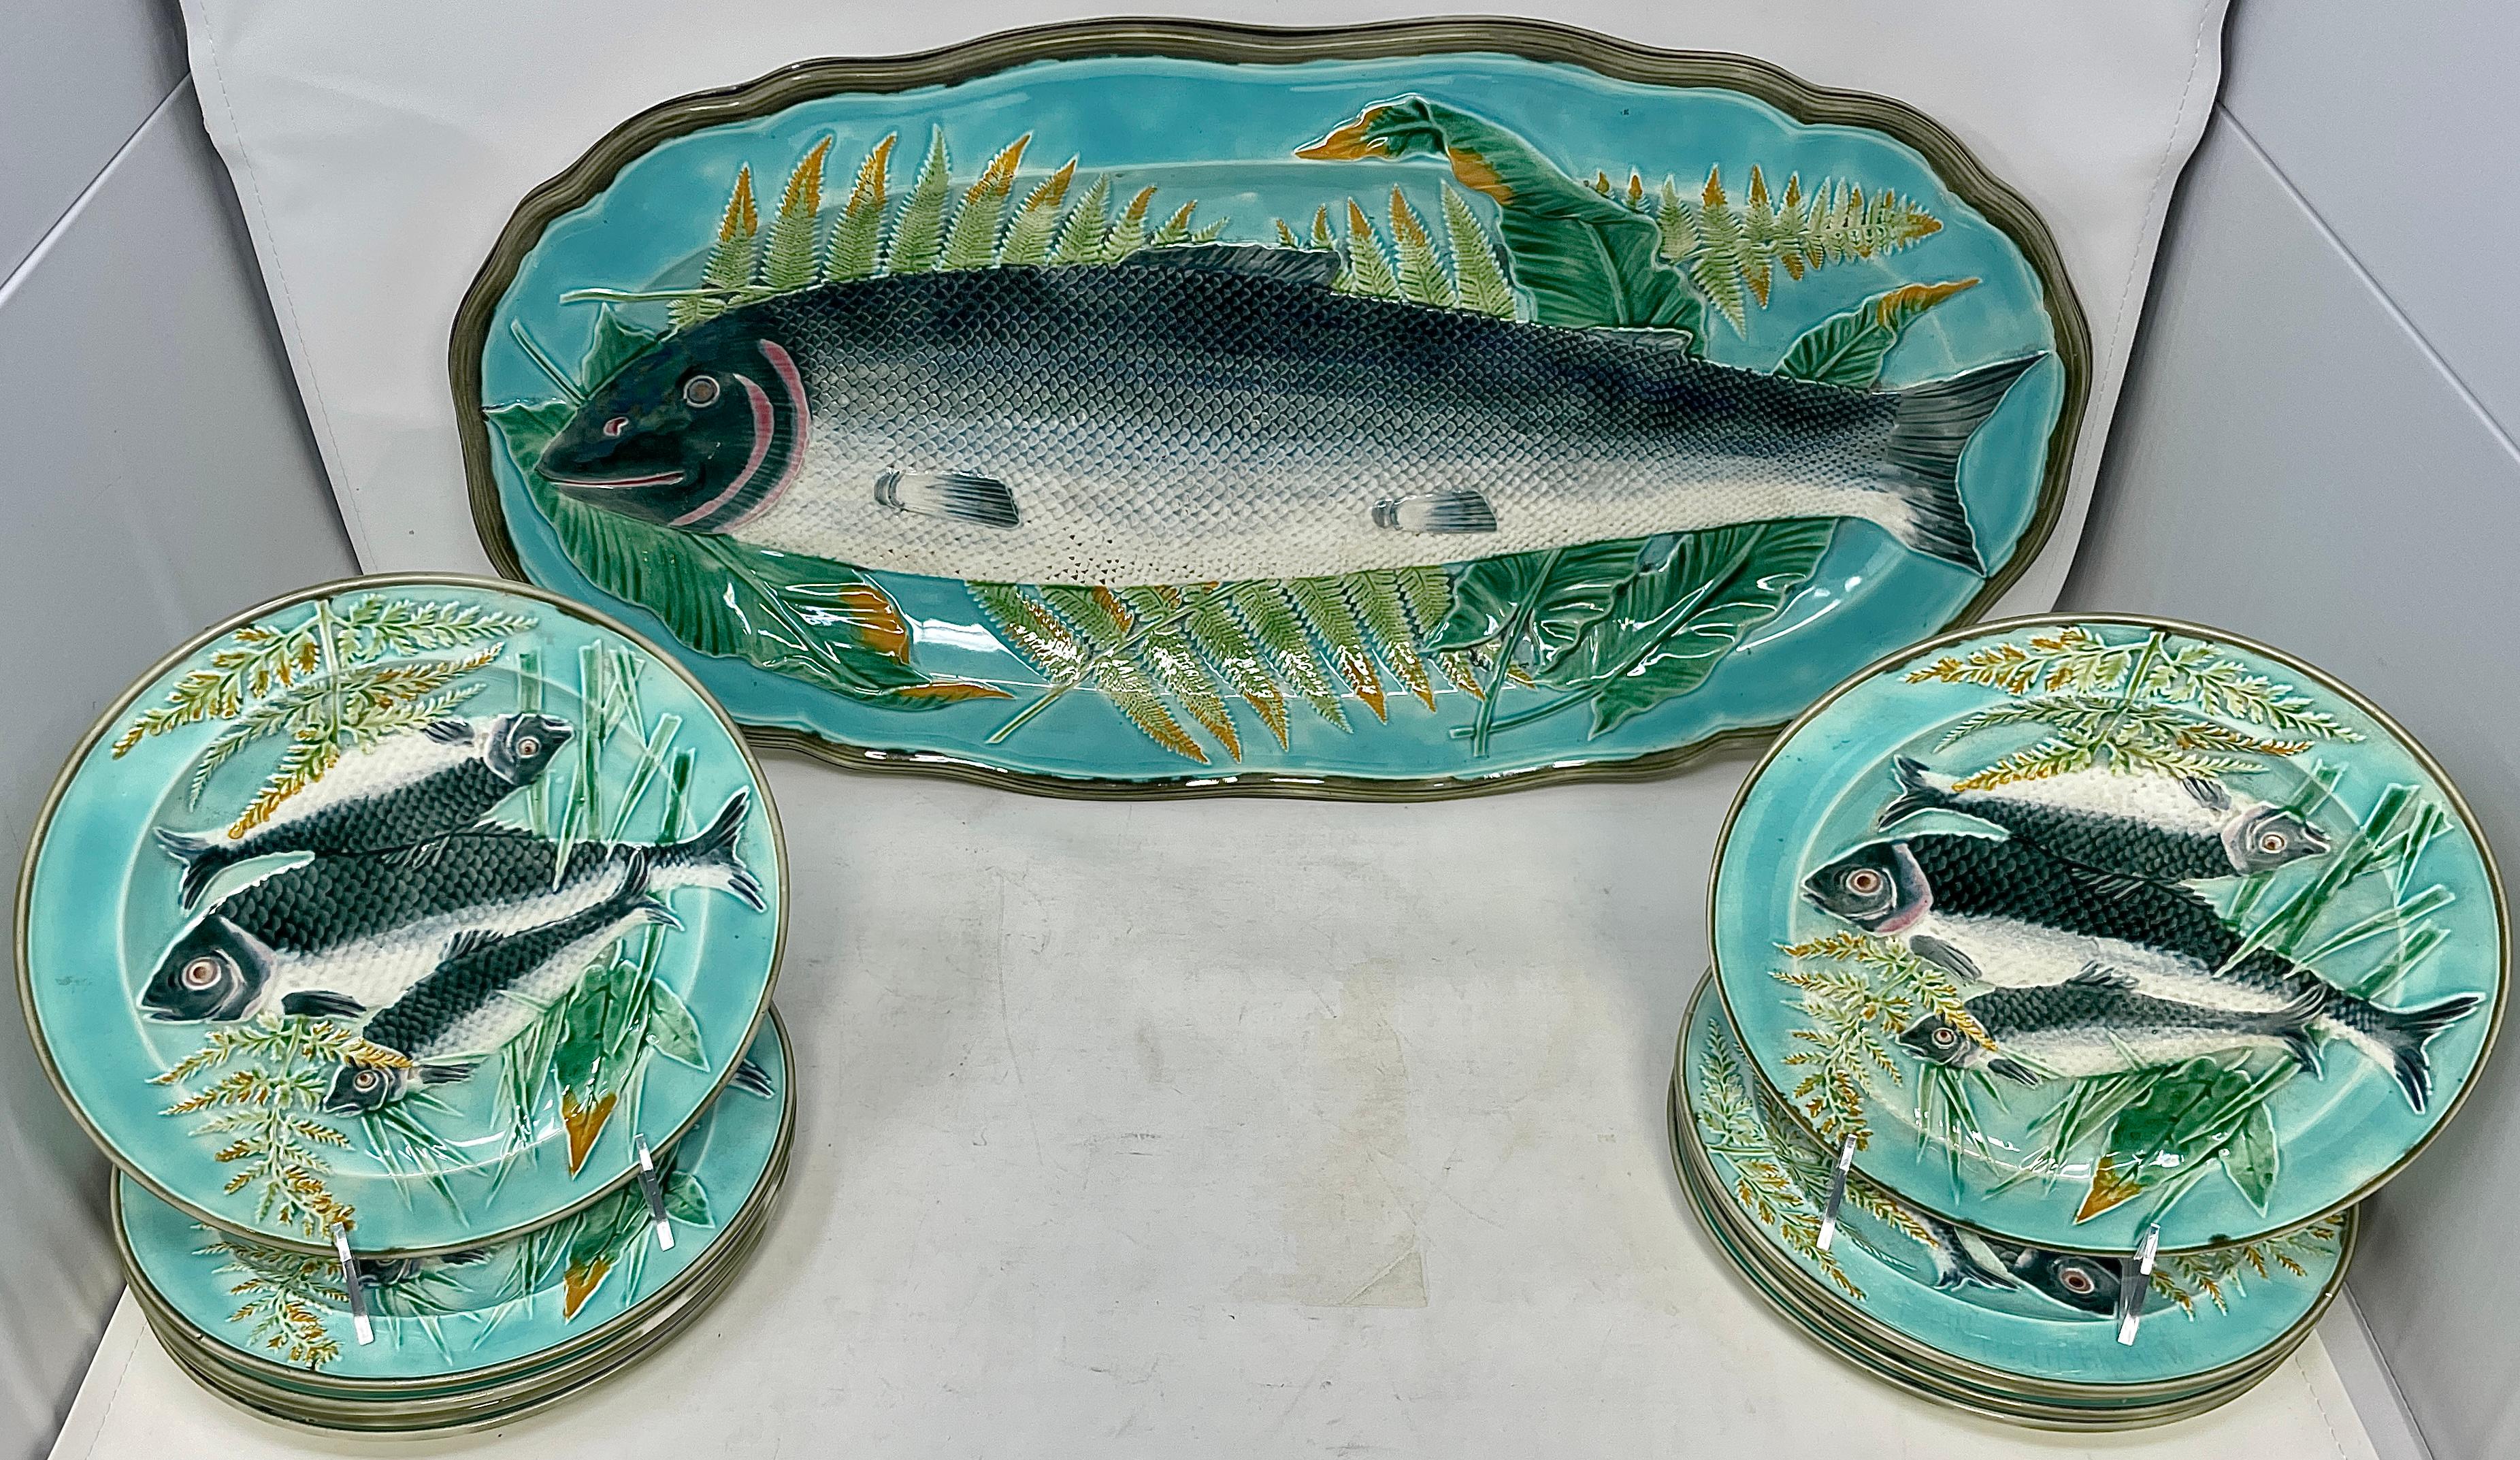 Antique 19th century English wedgwood Majolica fish set, 1 platter and 10 plates, Circa 1880-1890. Aesthetic movement with lovely natural coloring of sea blues, sea-greens and earthy browns.
Platter dimensions: 1.25